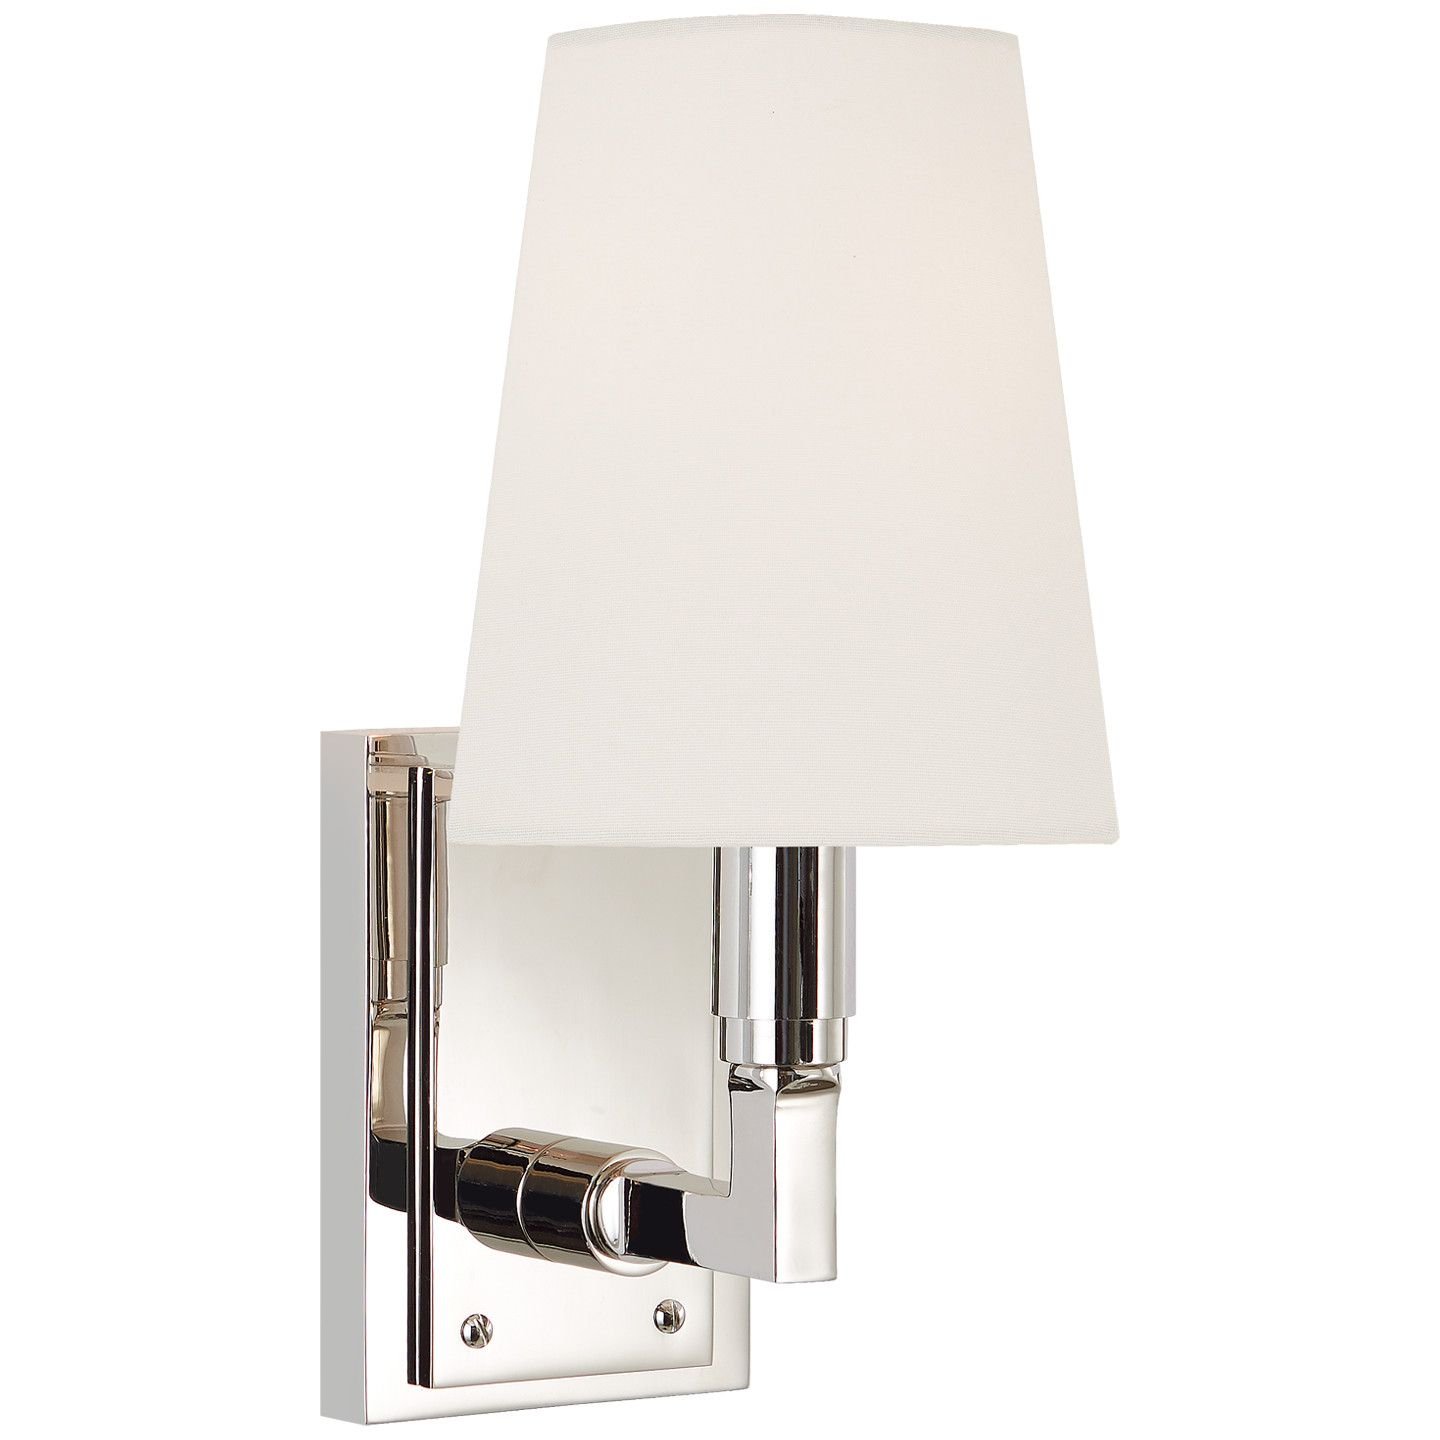 Watson Small Sconce Polished Nickel